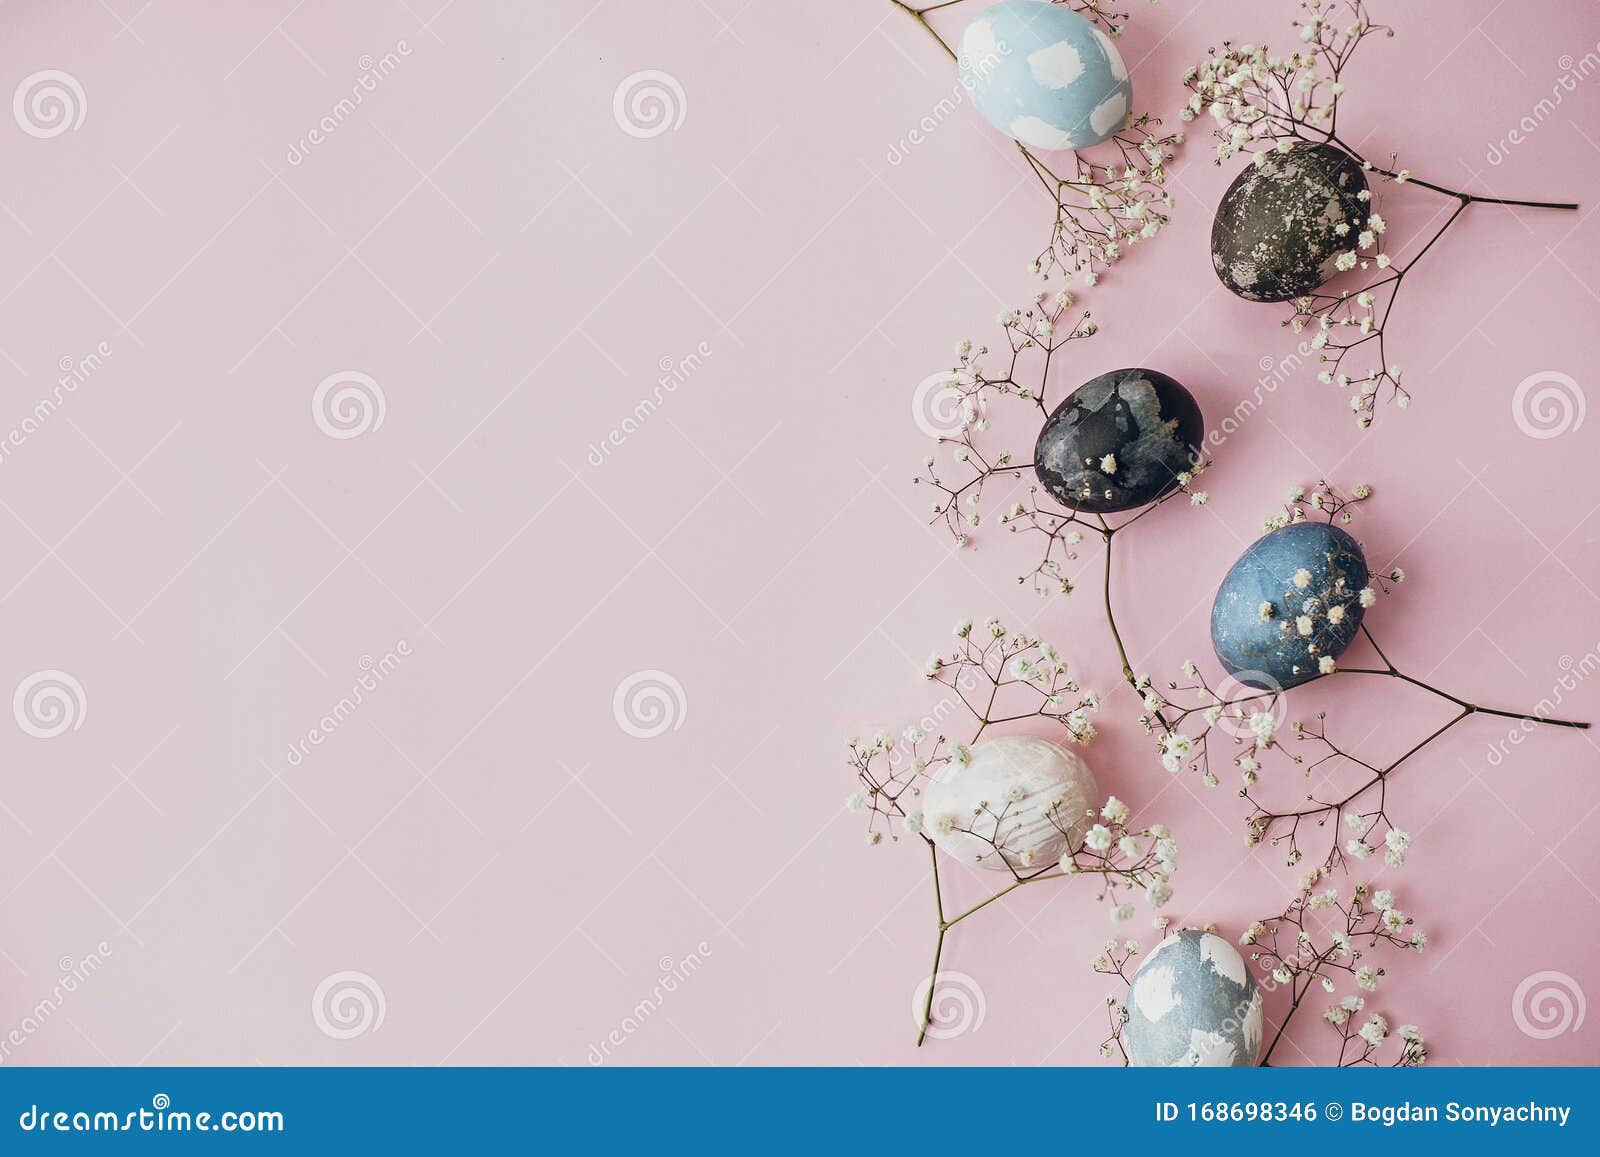 Stylish Easter Eggs and Spring Flowers Border on Pink Paper Flat Lay ...